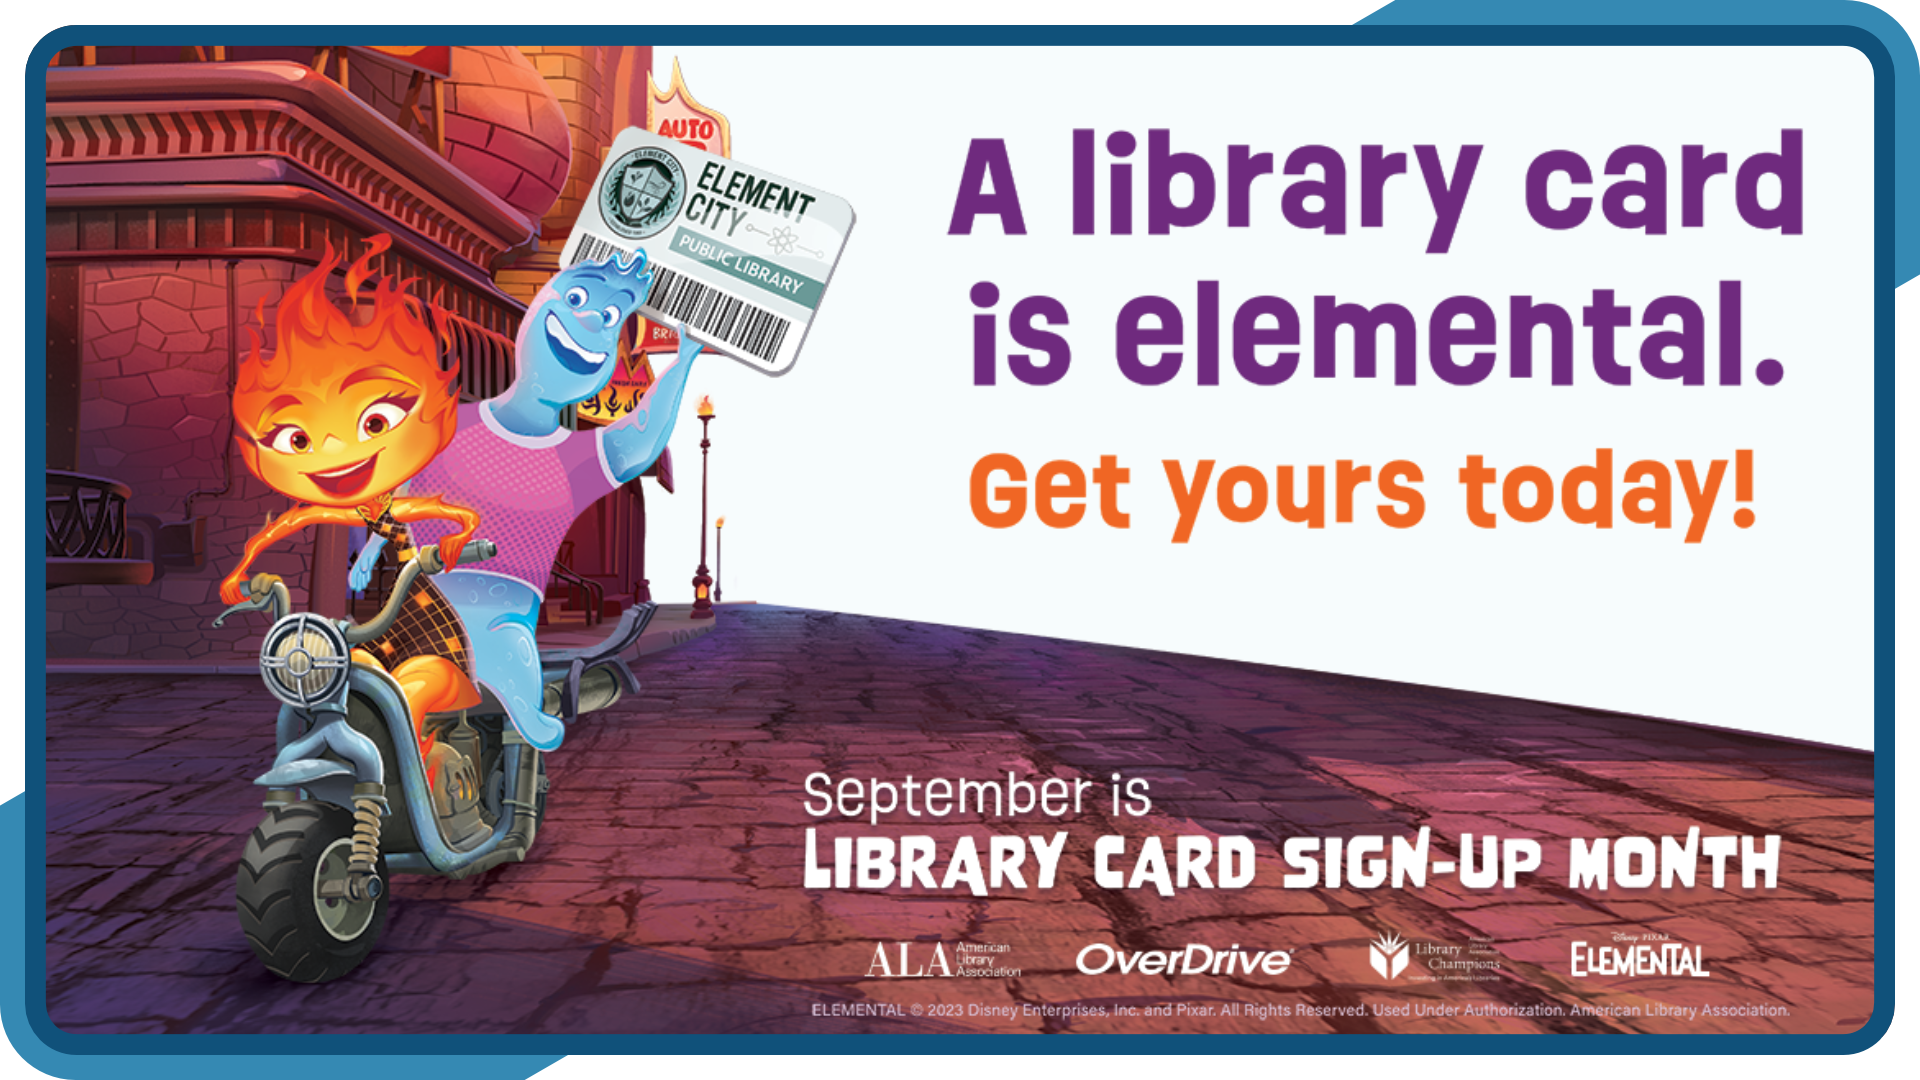 Characters from Disney-Pixar's Elemental with caption "A library card is elemental. Get yours today!"